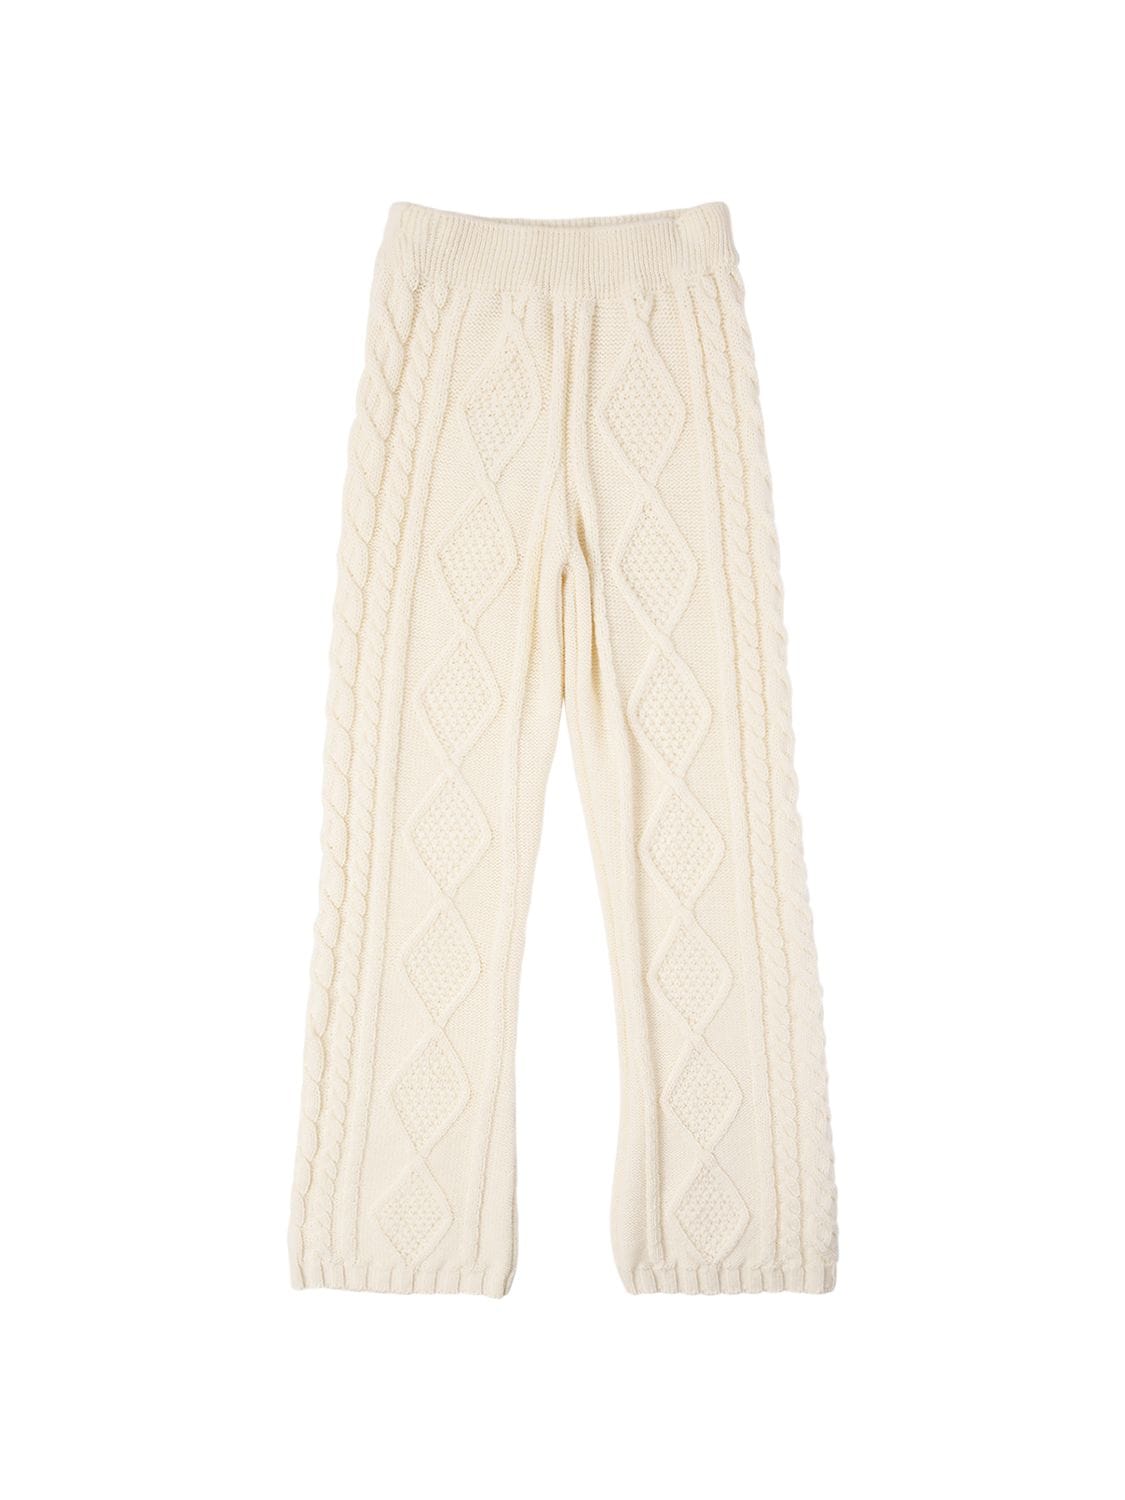 MSGM WOOL BLEND CABLE KNIT PANTS